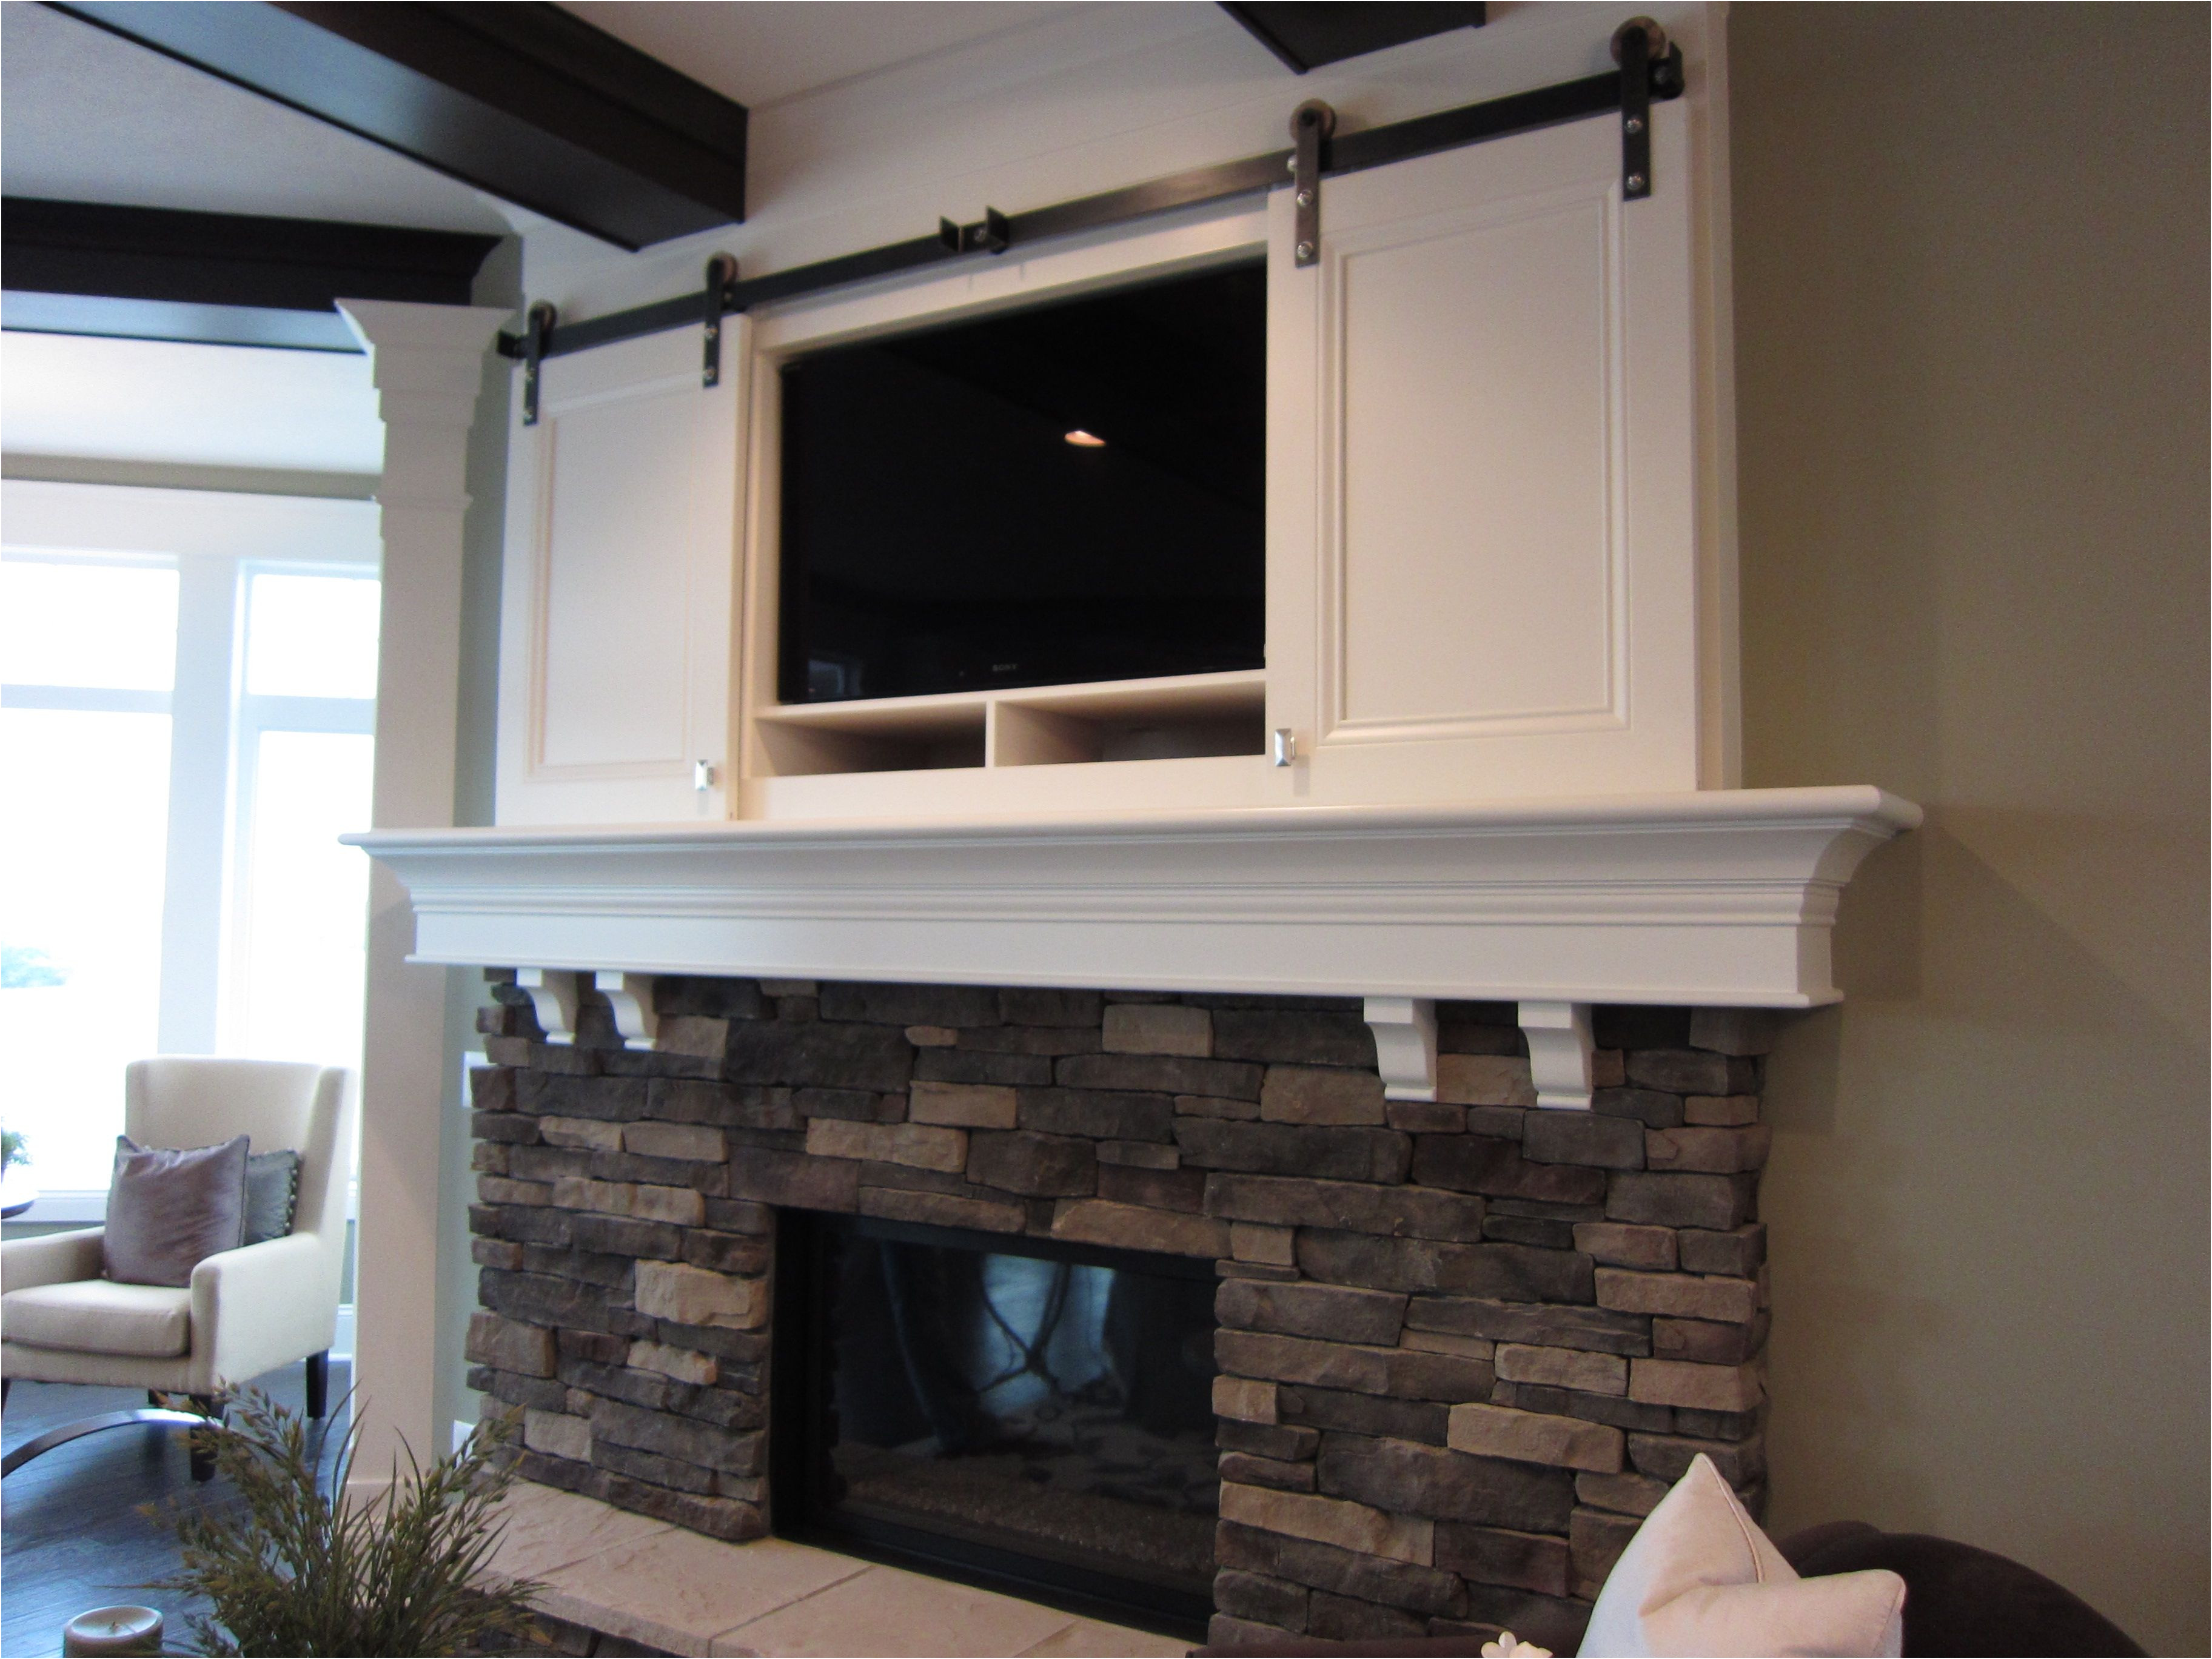 Best Of Ideas to Cover Fireplace